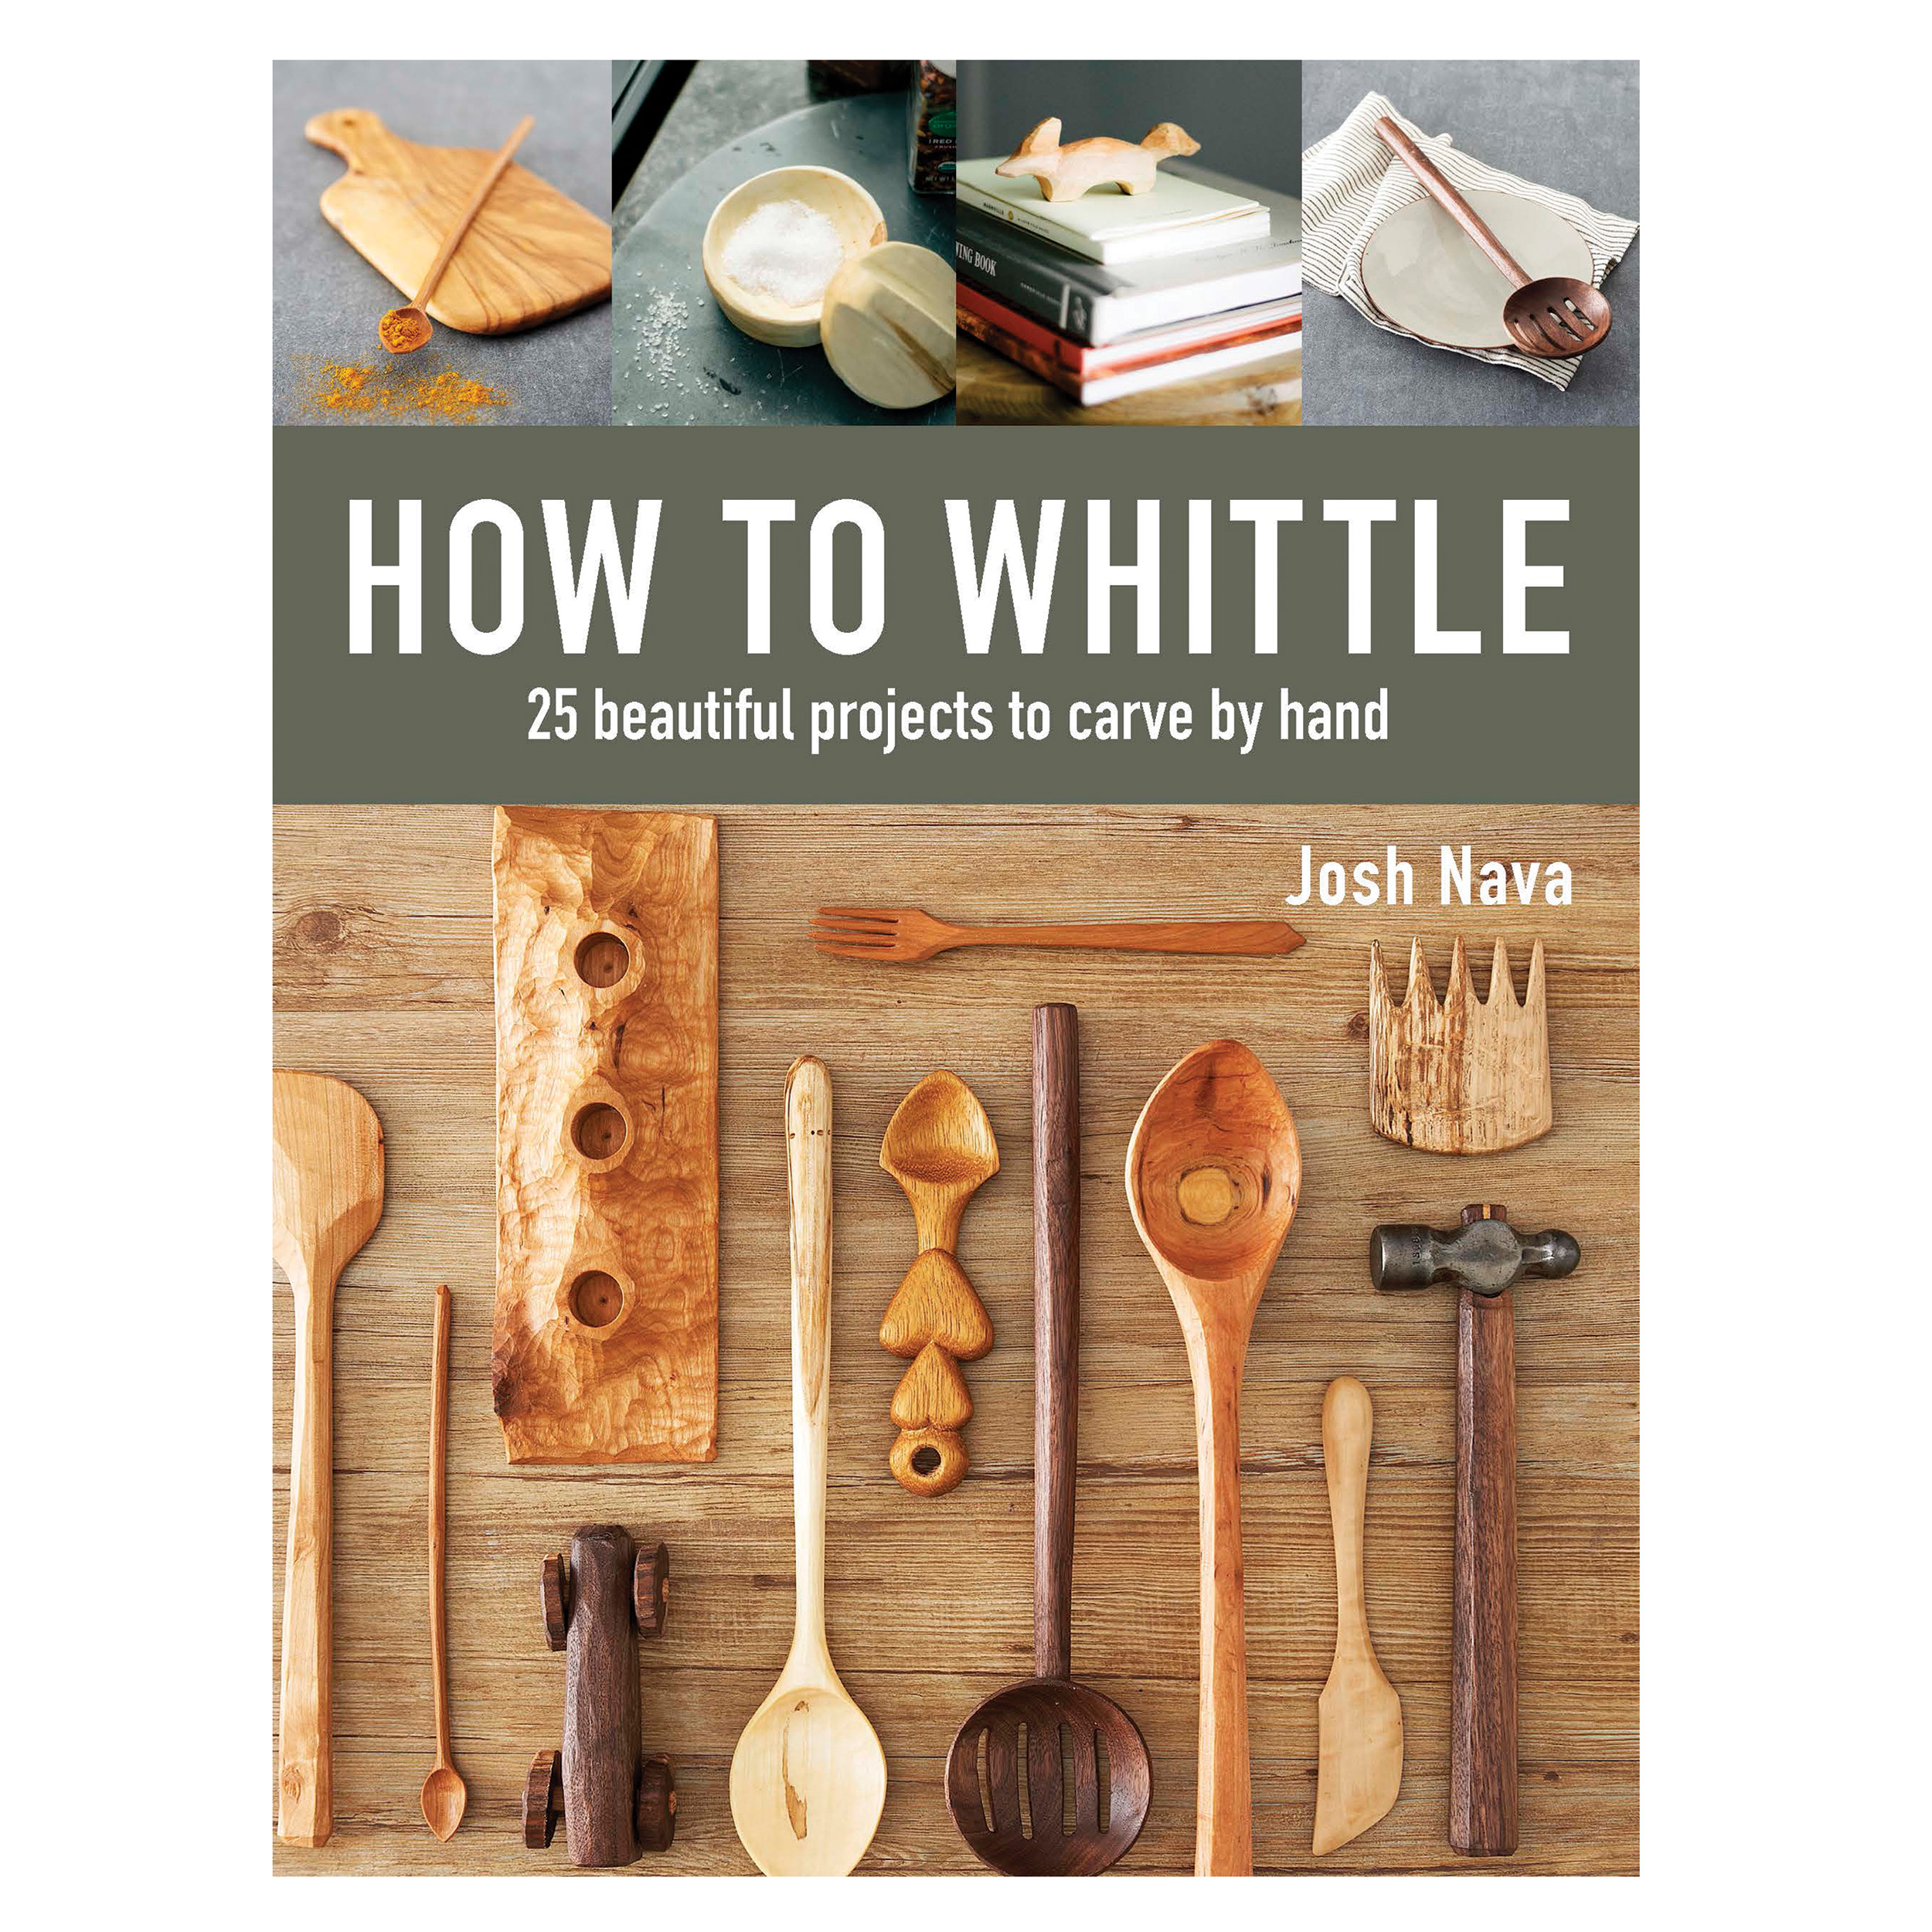 How To Whittle